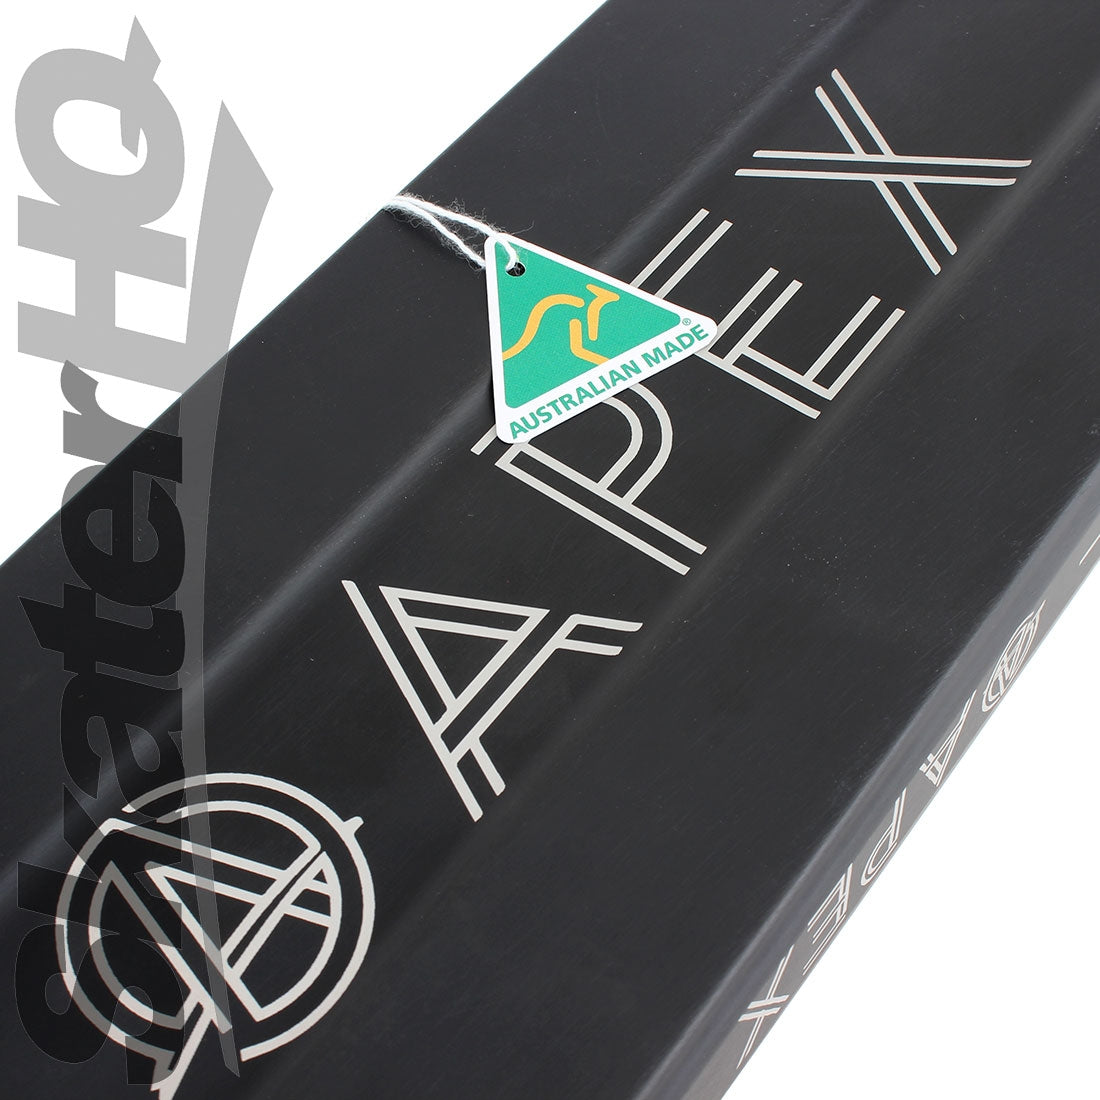 Apex 5inch 600mm Boxed Deck - Black Scooter Decks